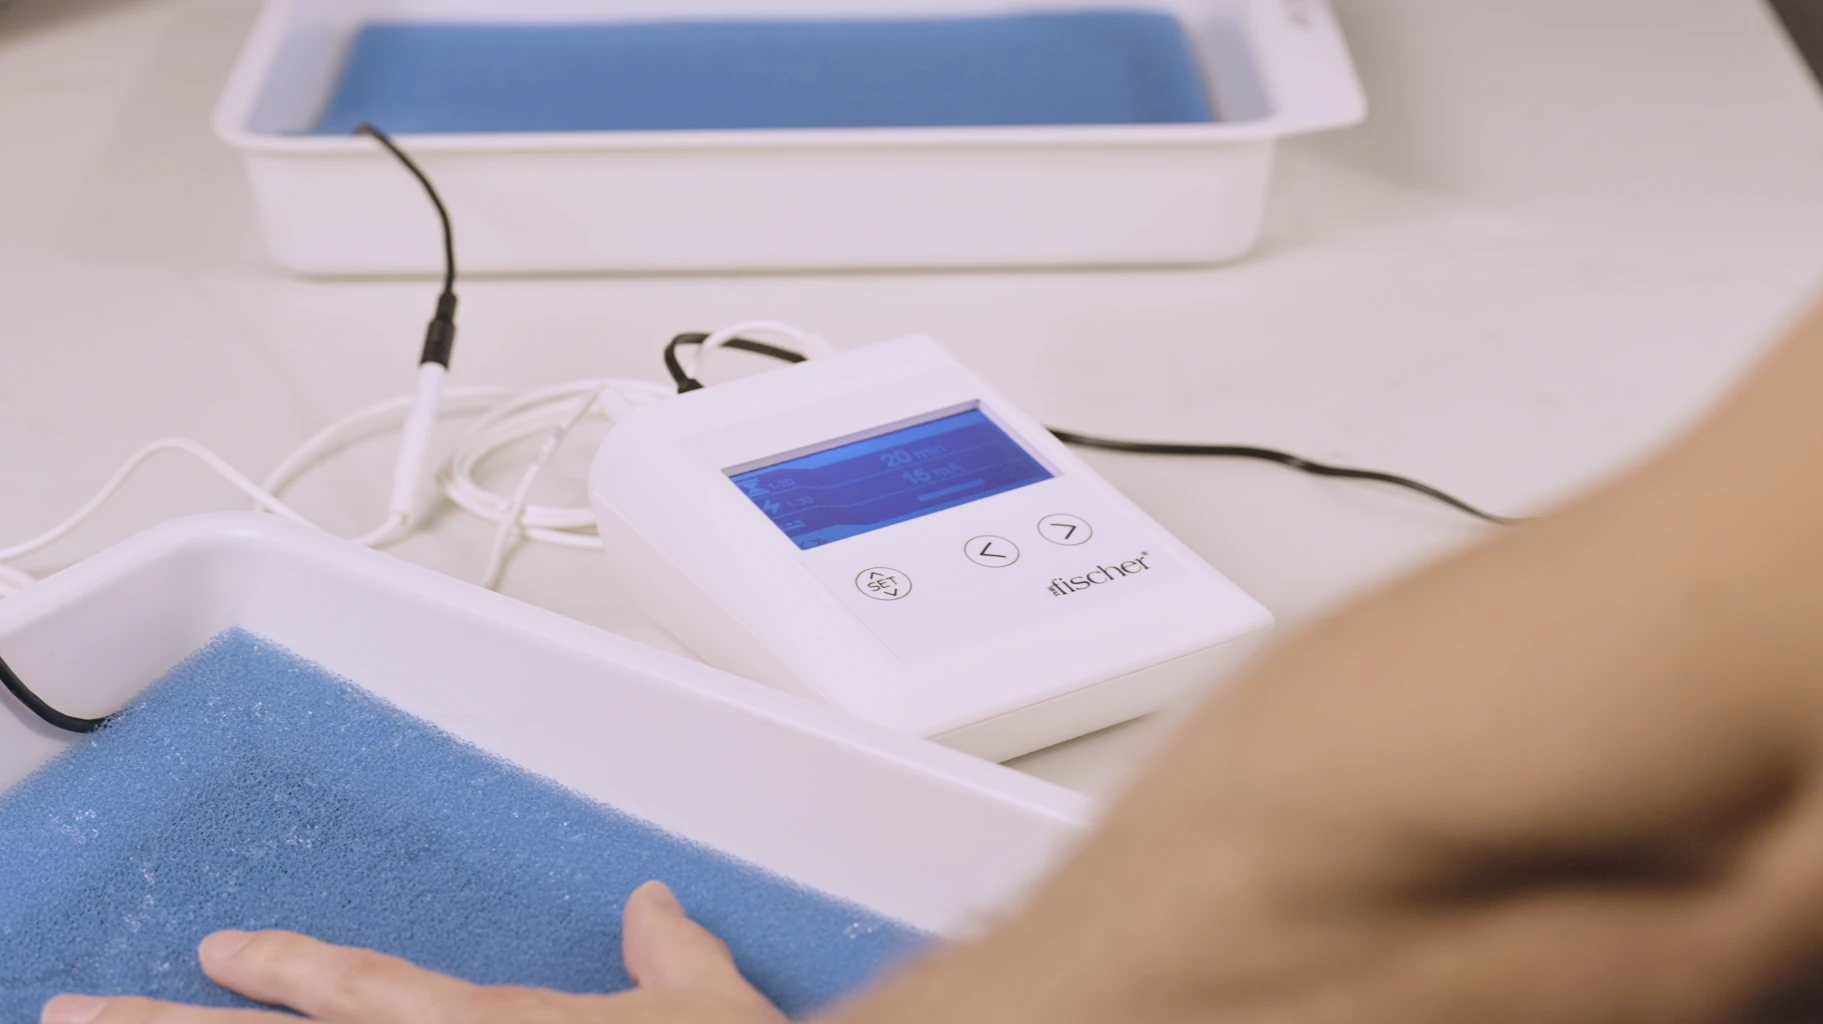 Image: A person undergoing palmar hyperhidrosis treatment by using RA Fischer Co.'s "The Fischer," the original metal-free iontophoresis device specifically designed for addressing excessive sweating of the hands.